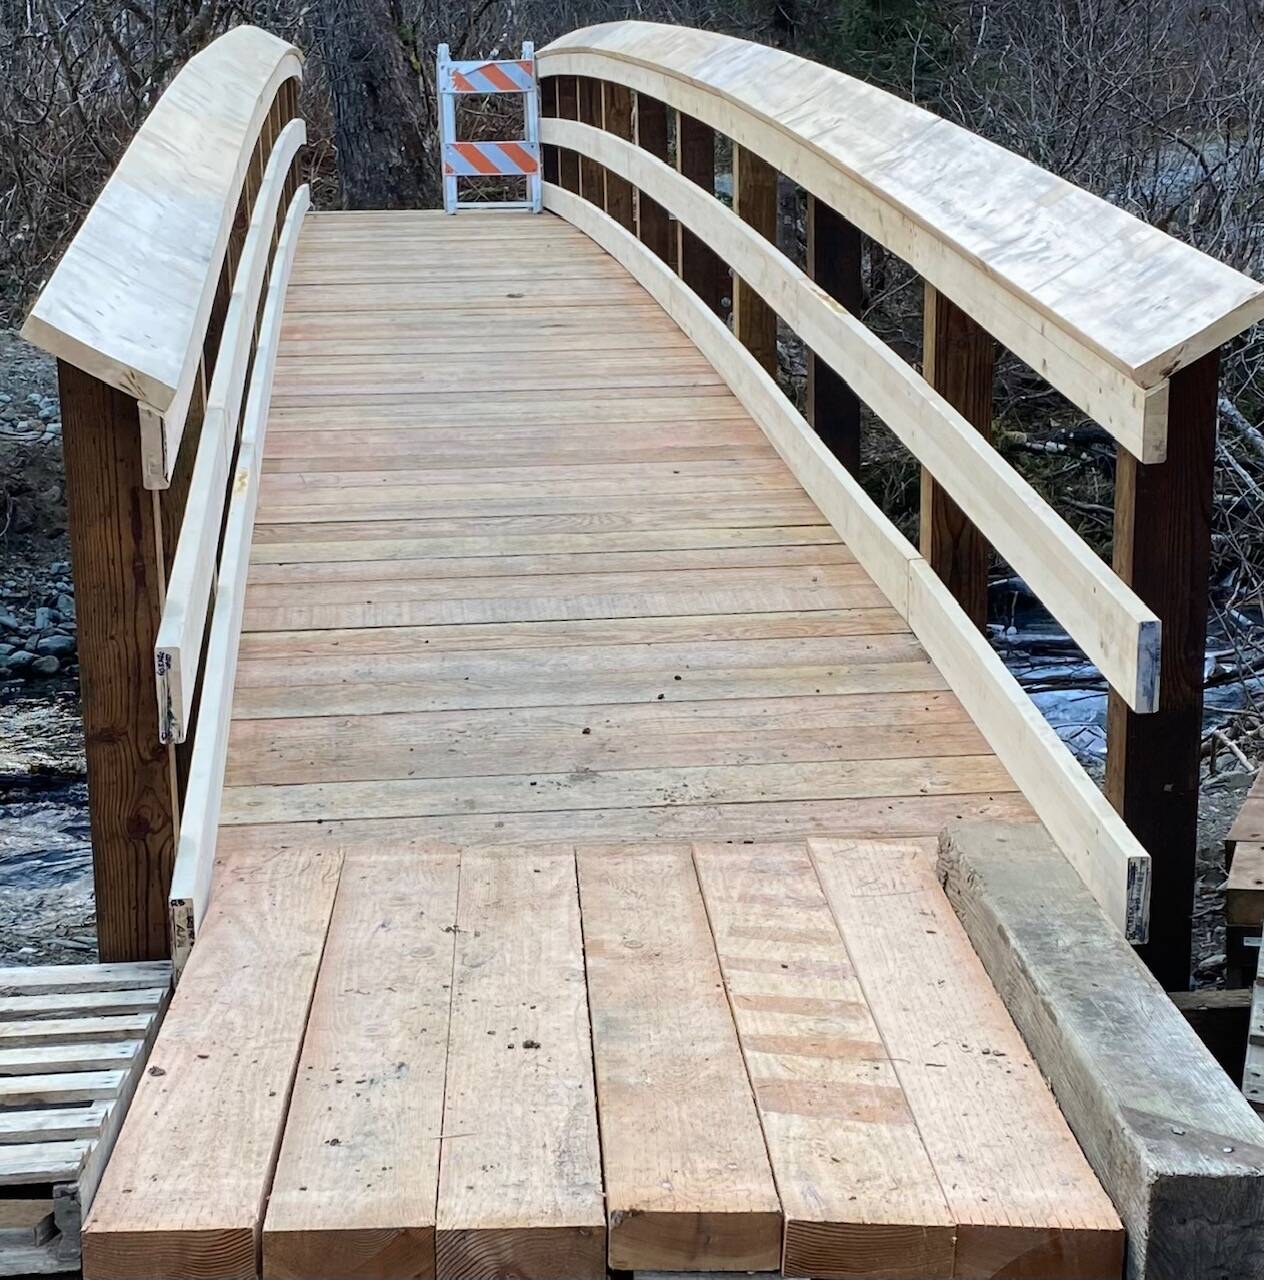 A brand-new bridge along Perseverance Trail, built by Trail Mix, seen on Oct. 25. (Photo by Denise Carroll)